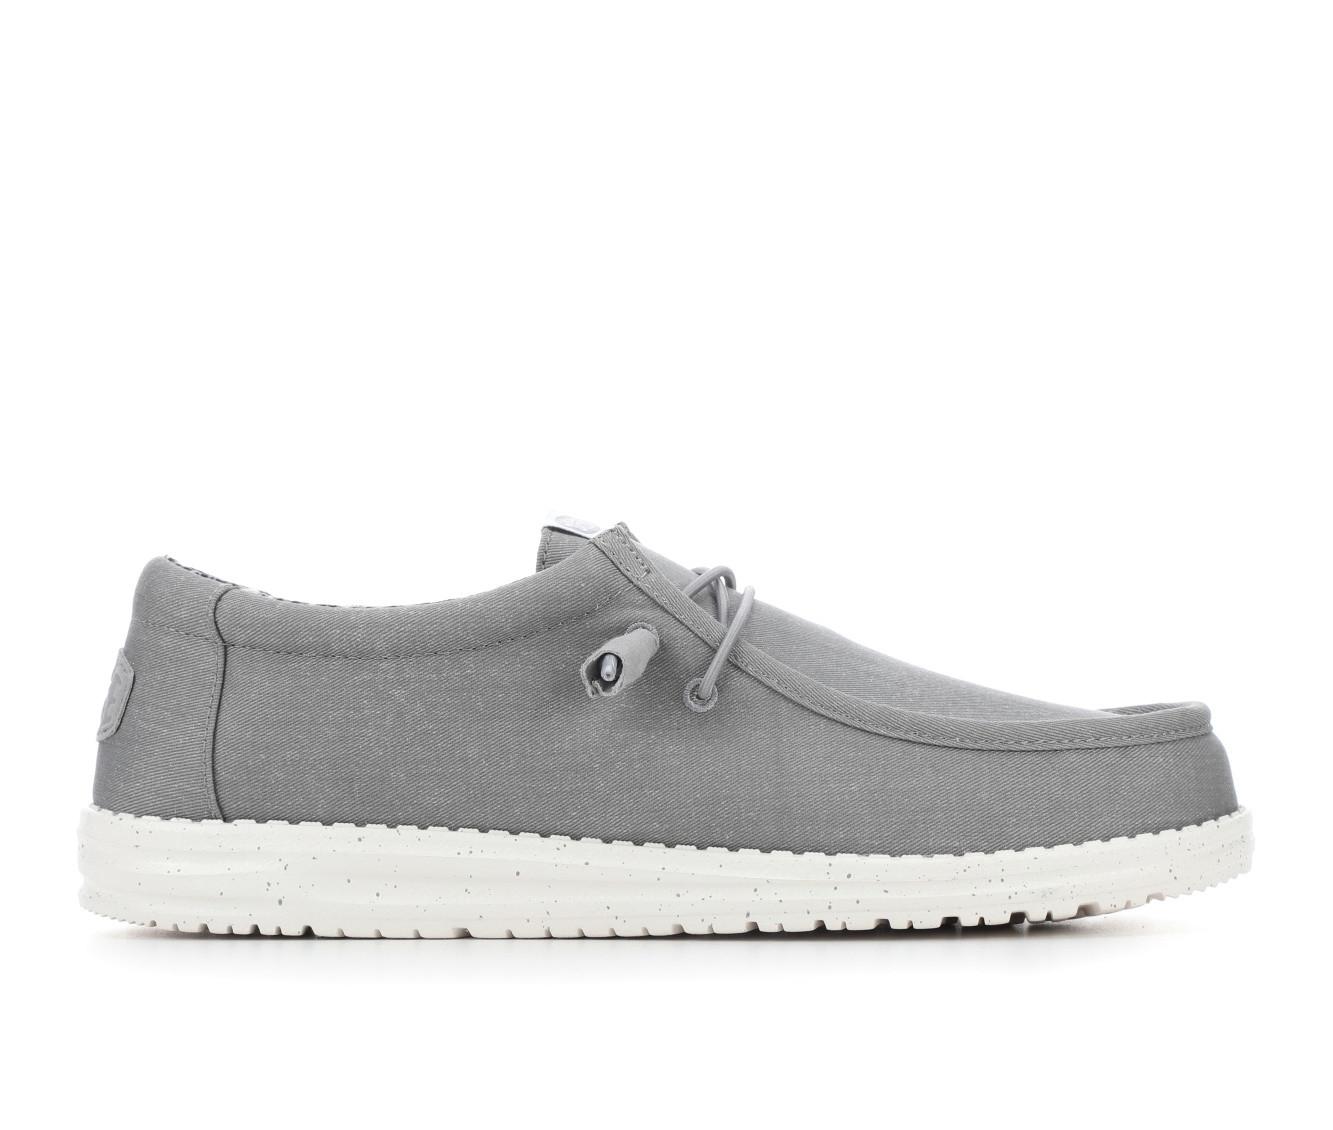 Men's HEYDUDE Wally Canvas-M Casual Shoes